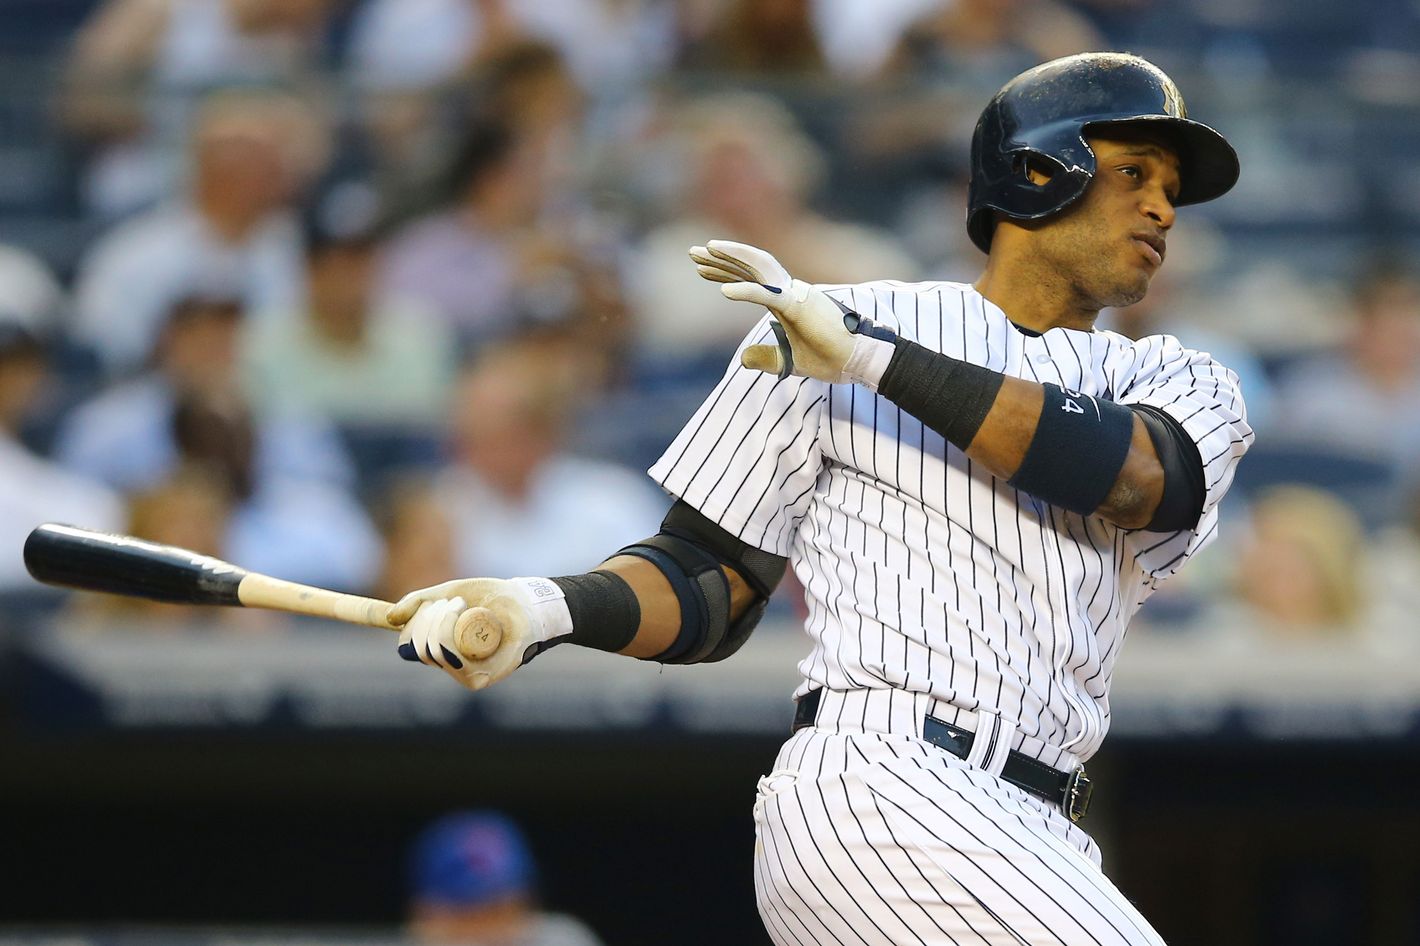 The Yankees Were Smart to Let Robinson Cano Leave